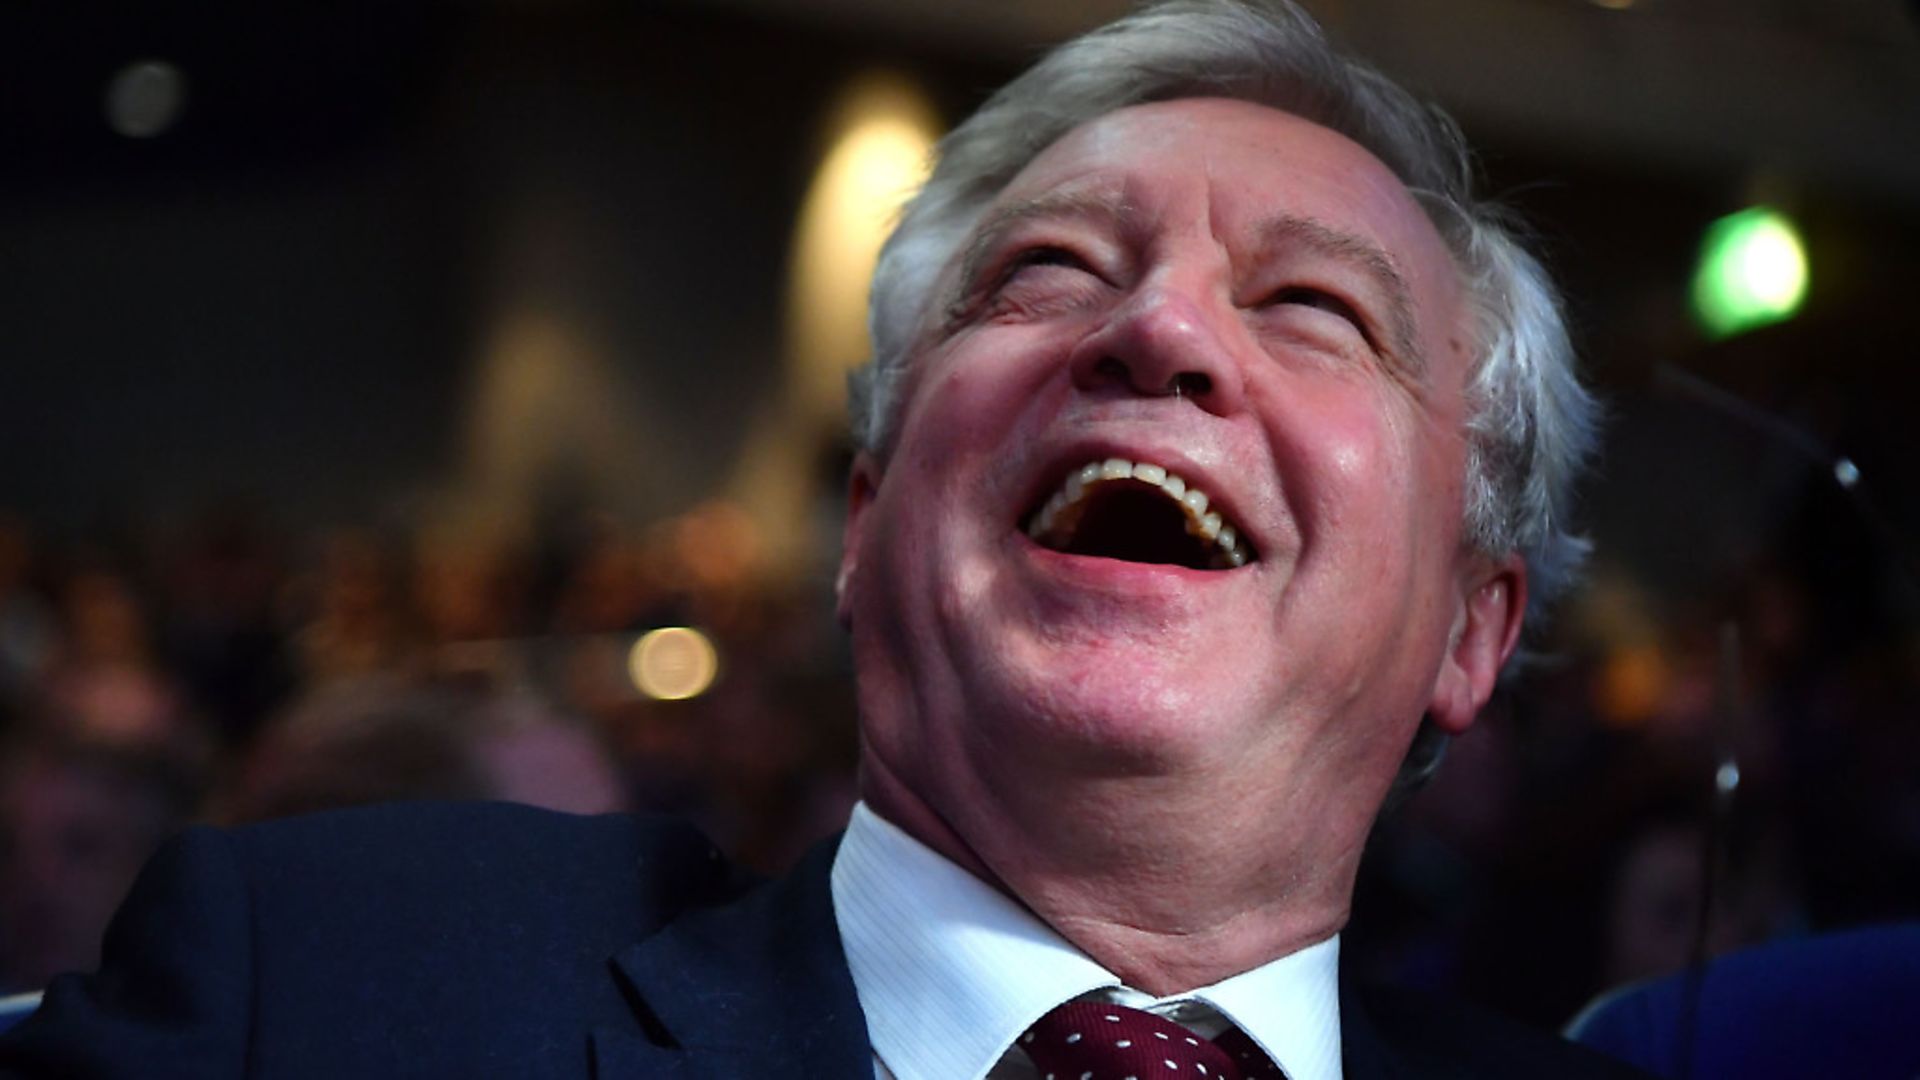 David Davis pockets �150,000 since quitting as Brexit minister. (BEN STANSALL/AFP/Getty Images) - Credit: AFP/Getty Images